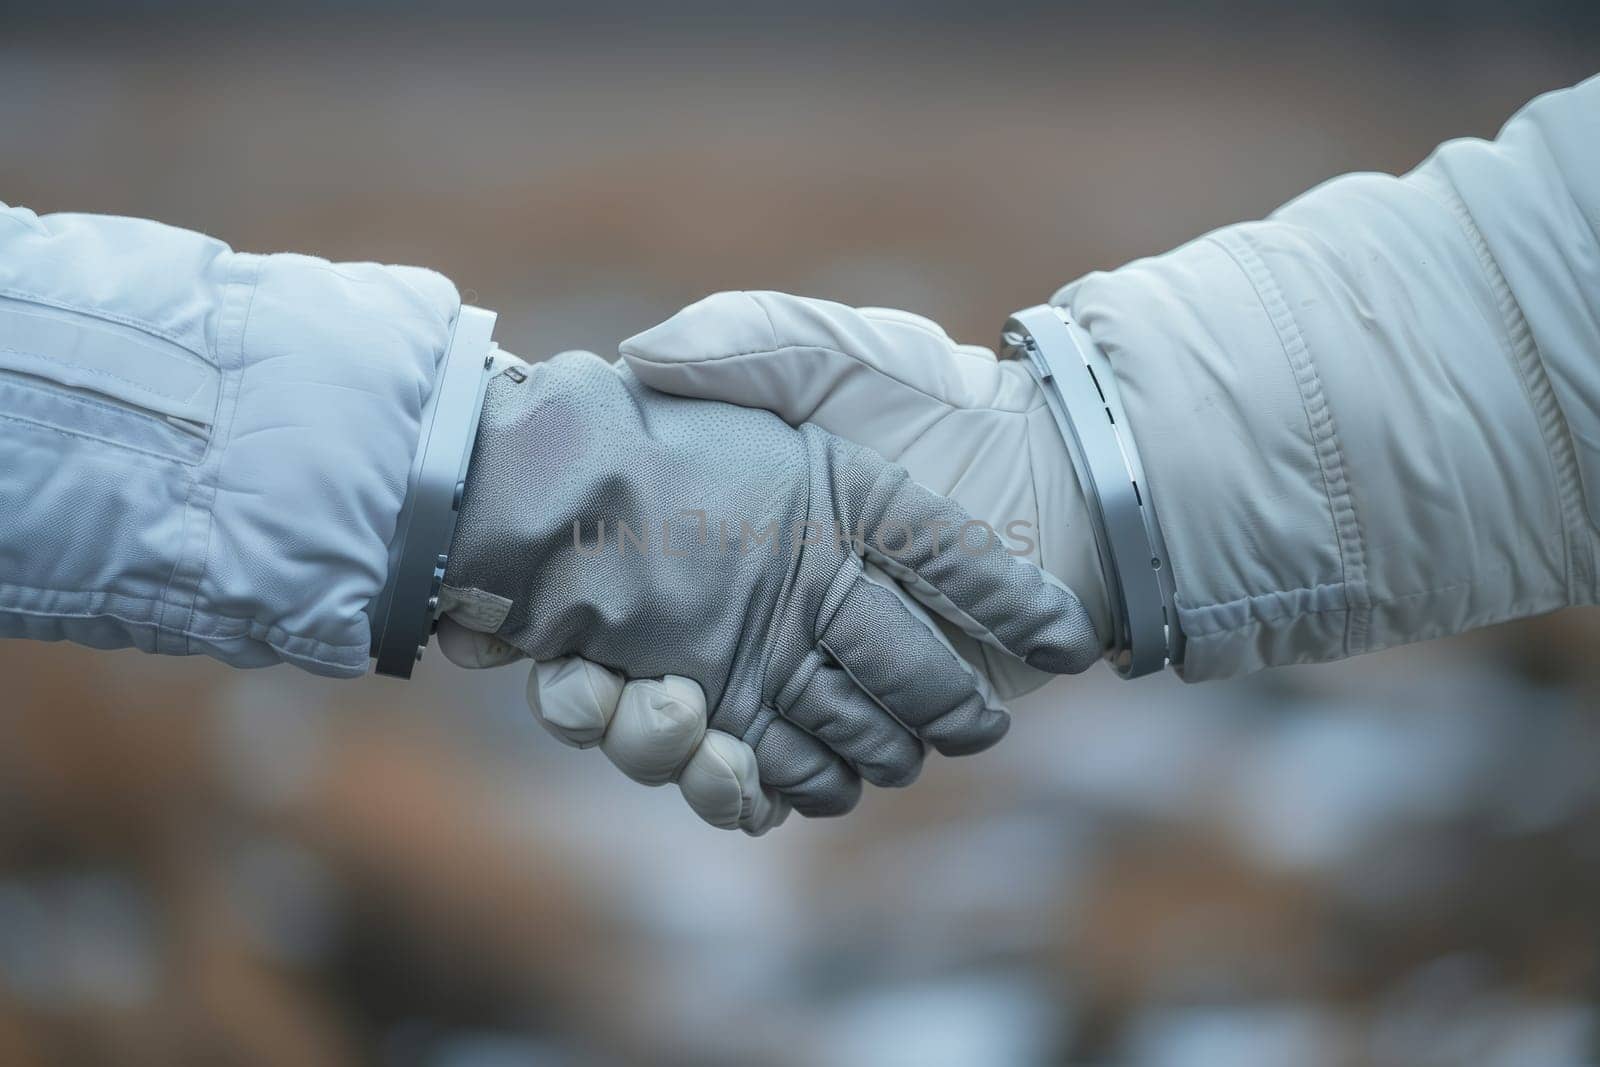 Handshake between two scientists in protective suits, collaboration and partnership in scientific research or hazardous environment